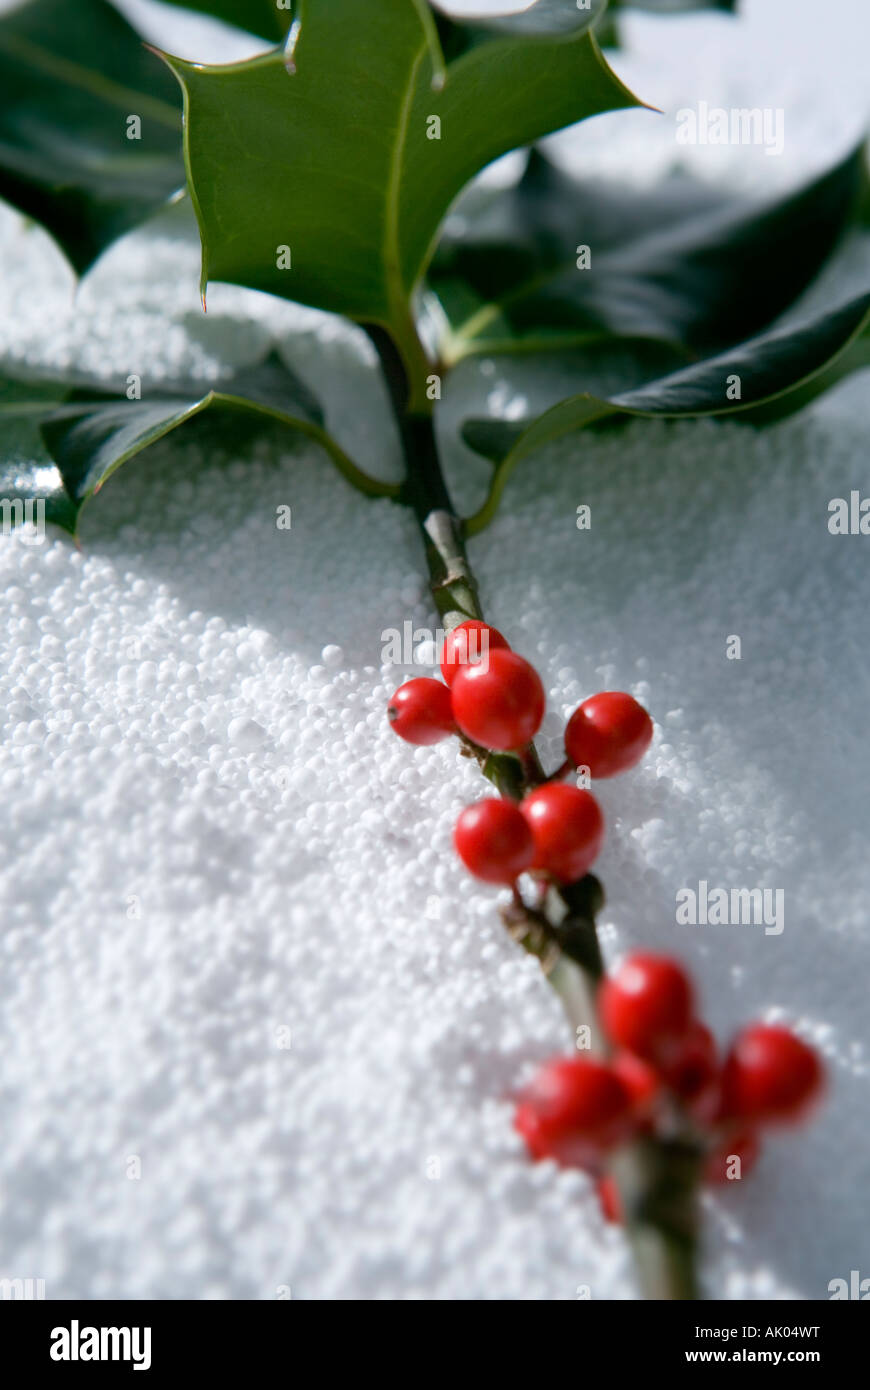 Close up shot of holly with red berries shot on faux snow Stock Photo